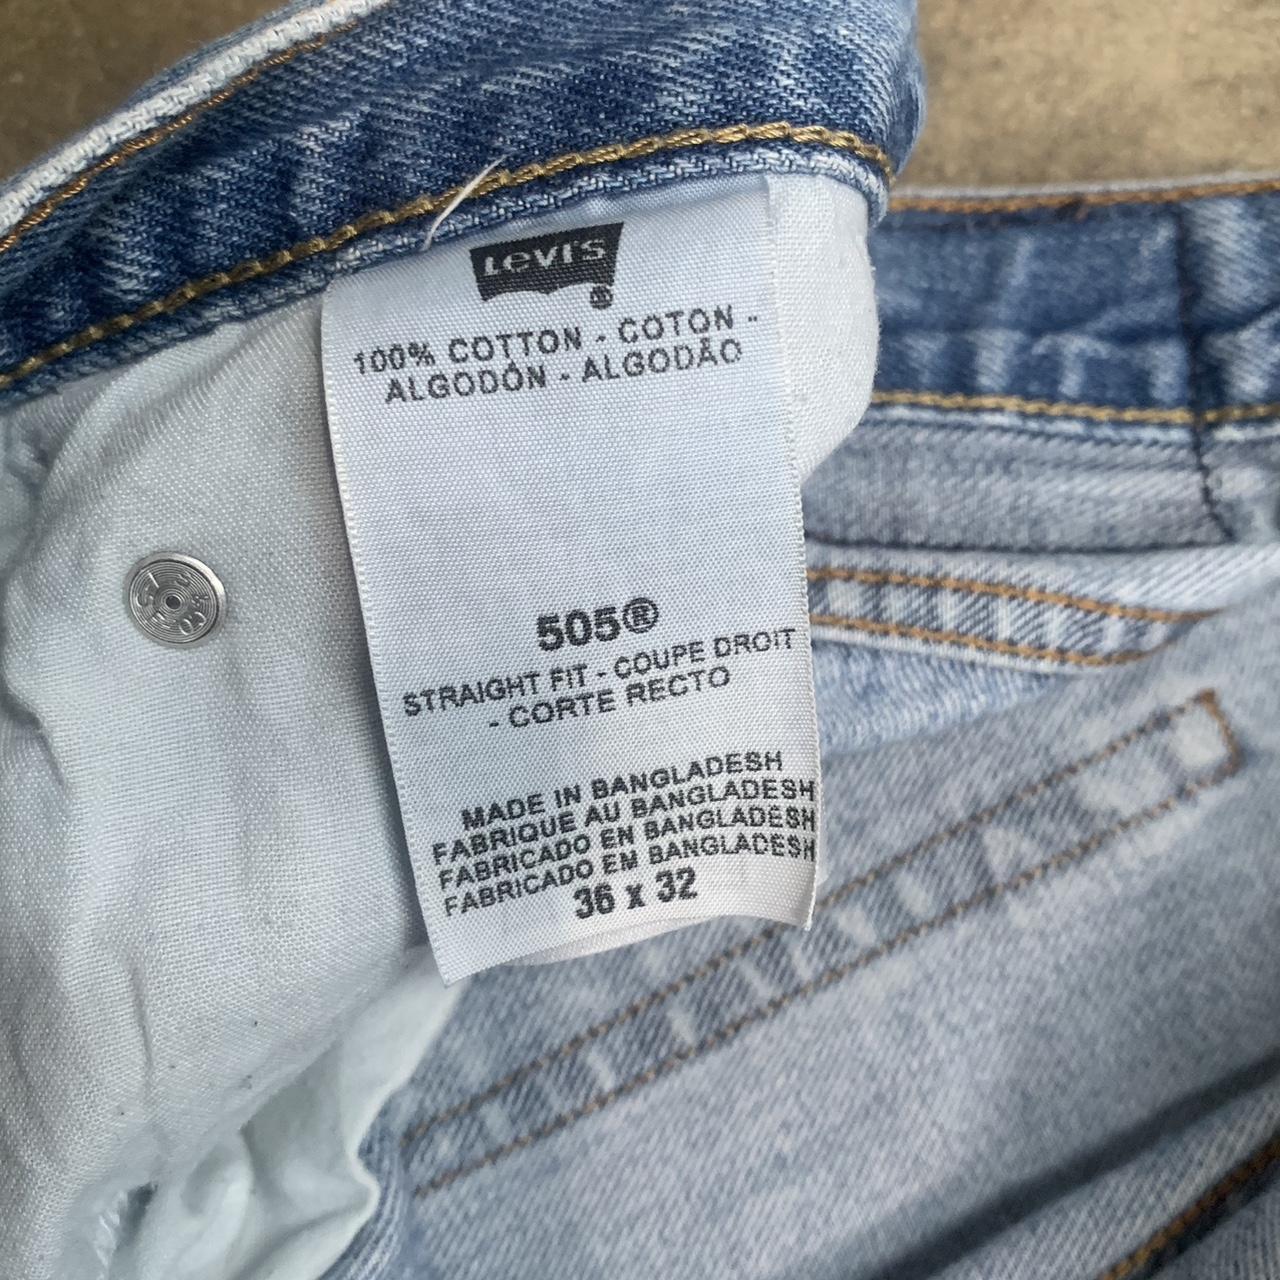 2010 Straight fit 505 Levi’s in good condition Has... - Depop